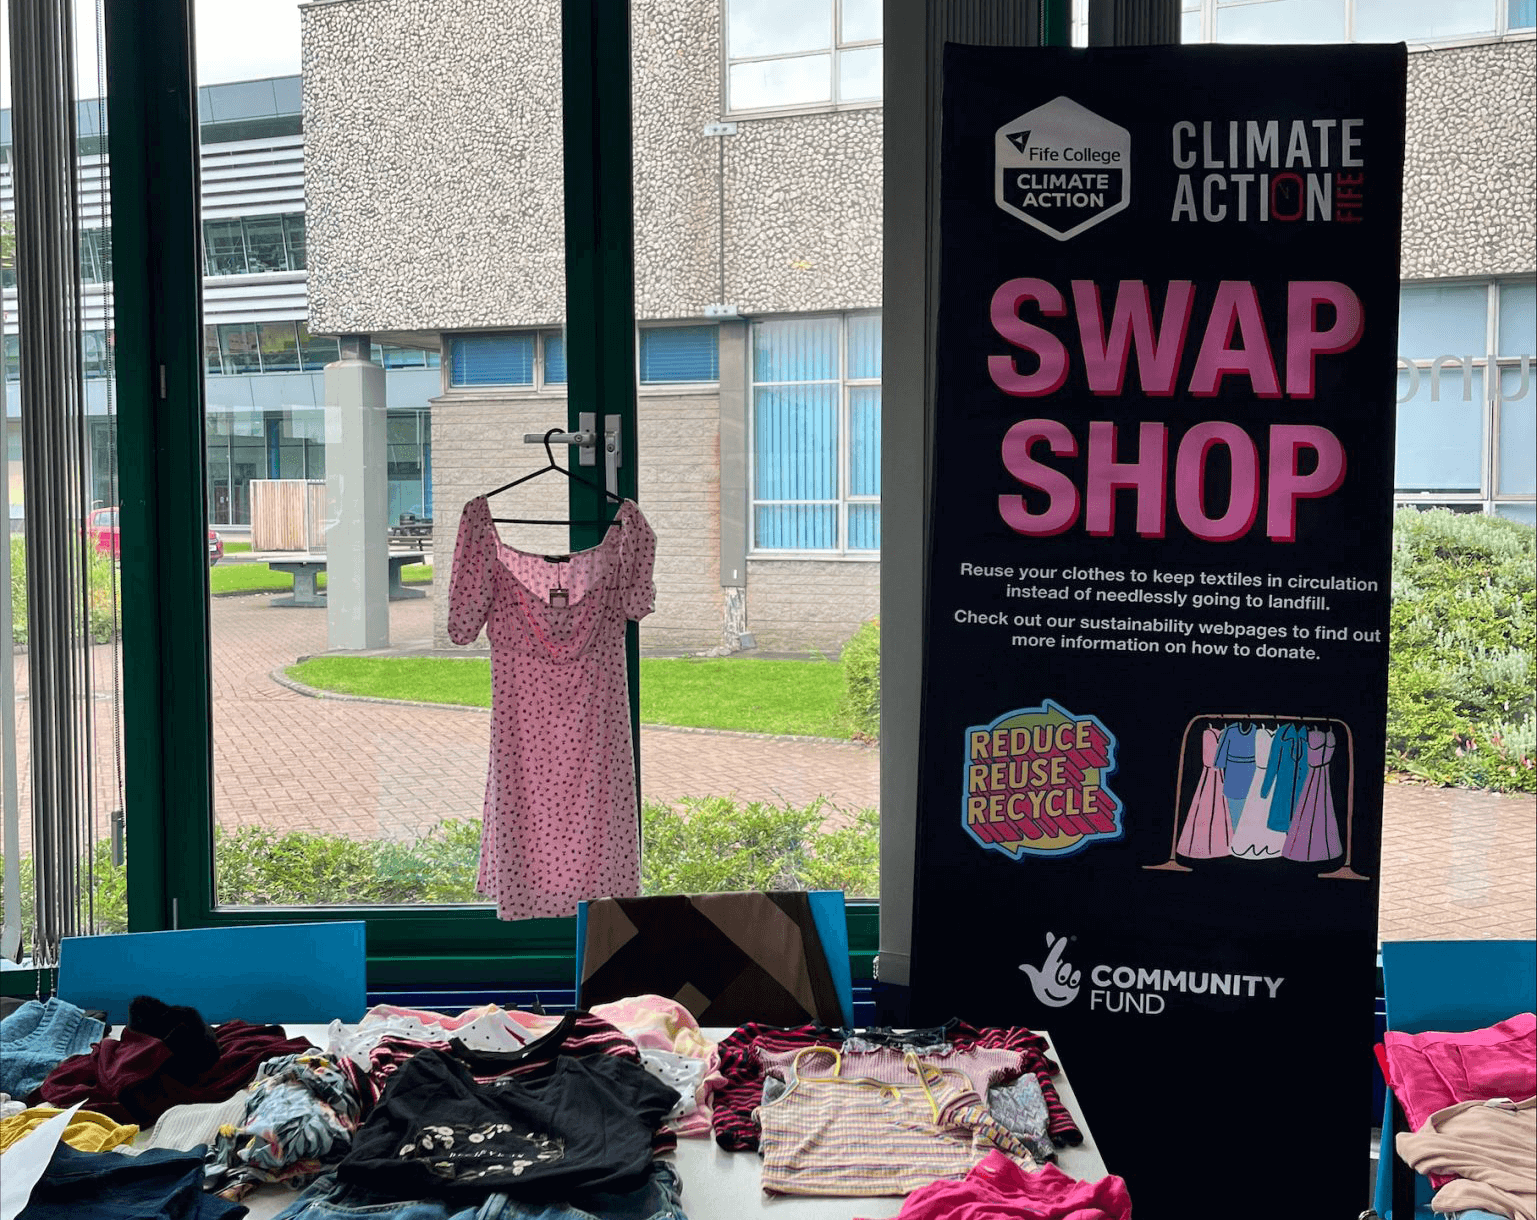 Fife College to host Swap Shop as part of Fife Climate Festival